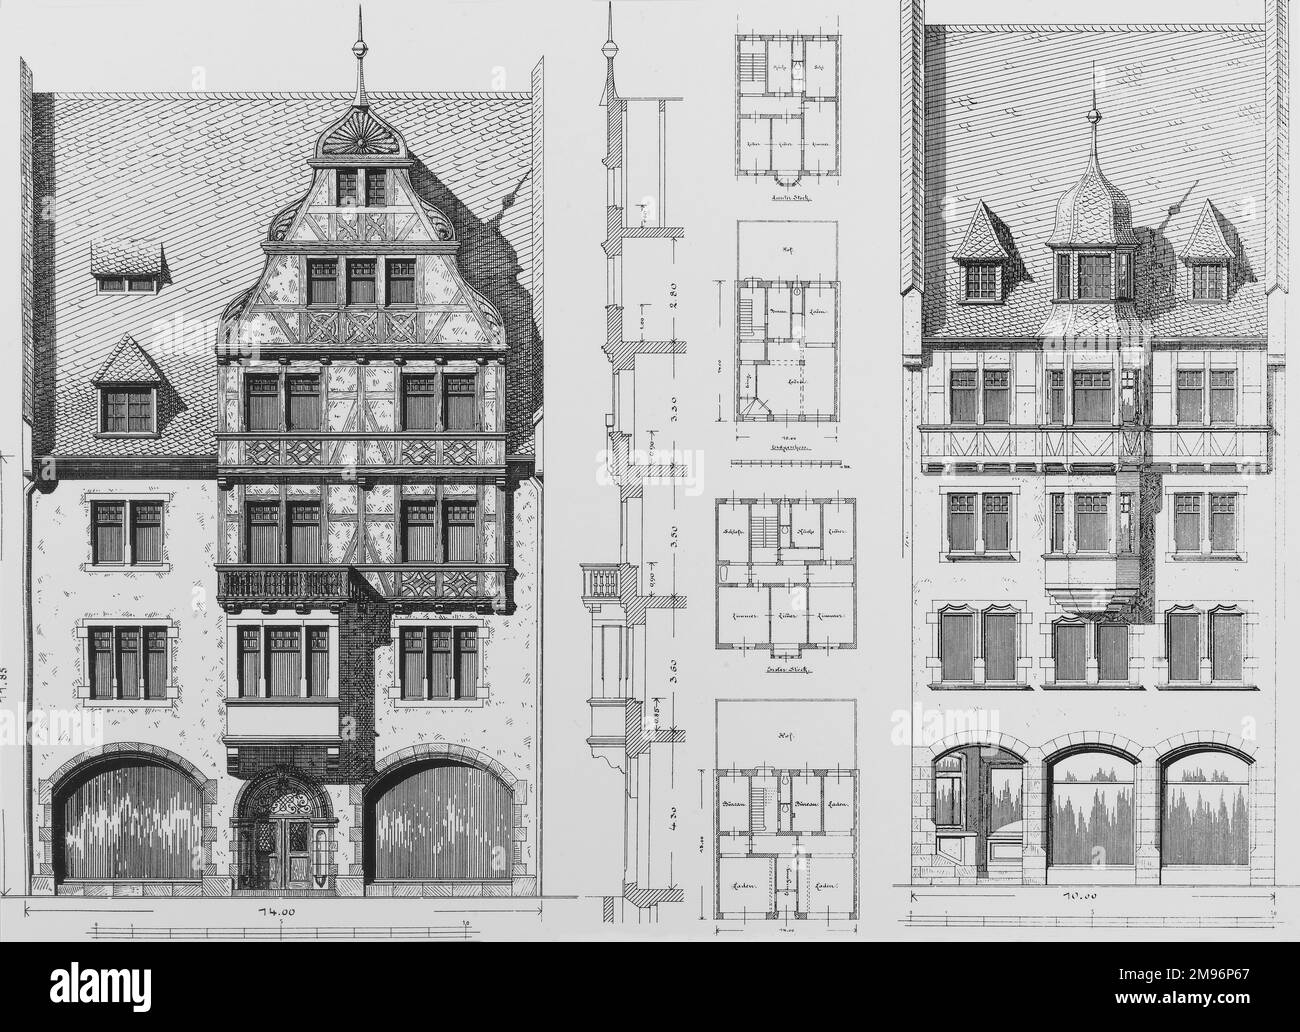 A detailed illistration of a German regional building along with its floor plan. Stock Photo